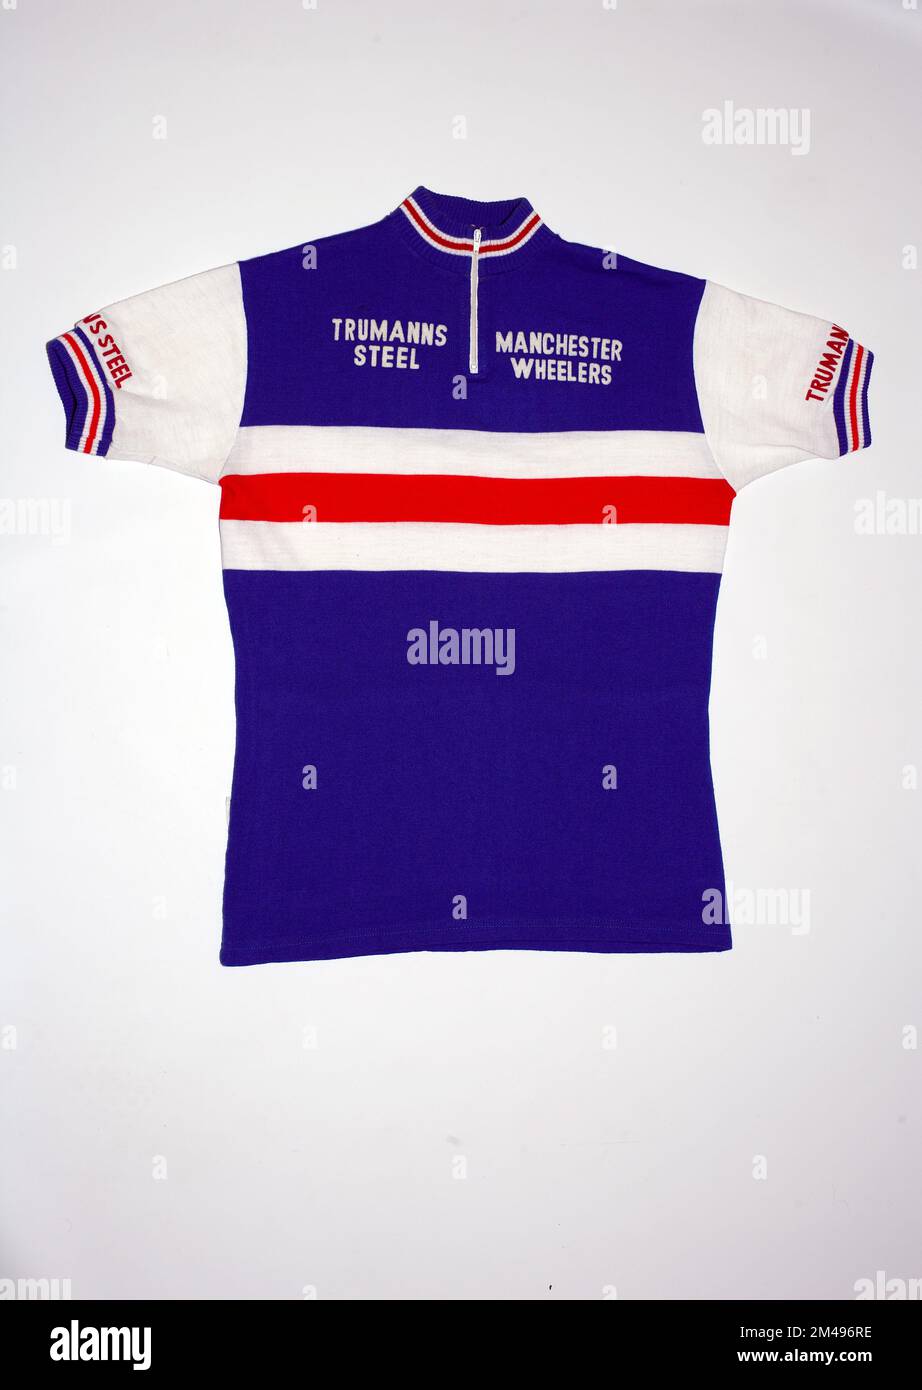 Iconic club jersey Manchester Wheelers-Trumans Steel Stock Photo